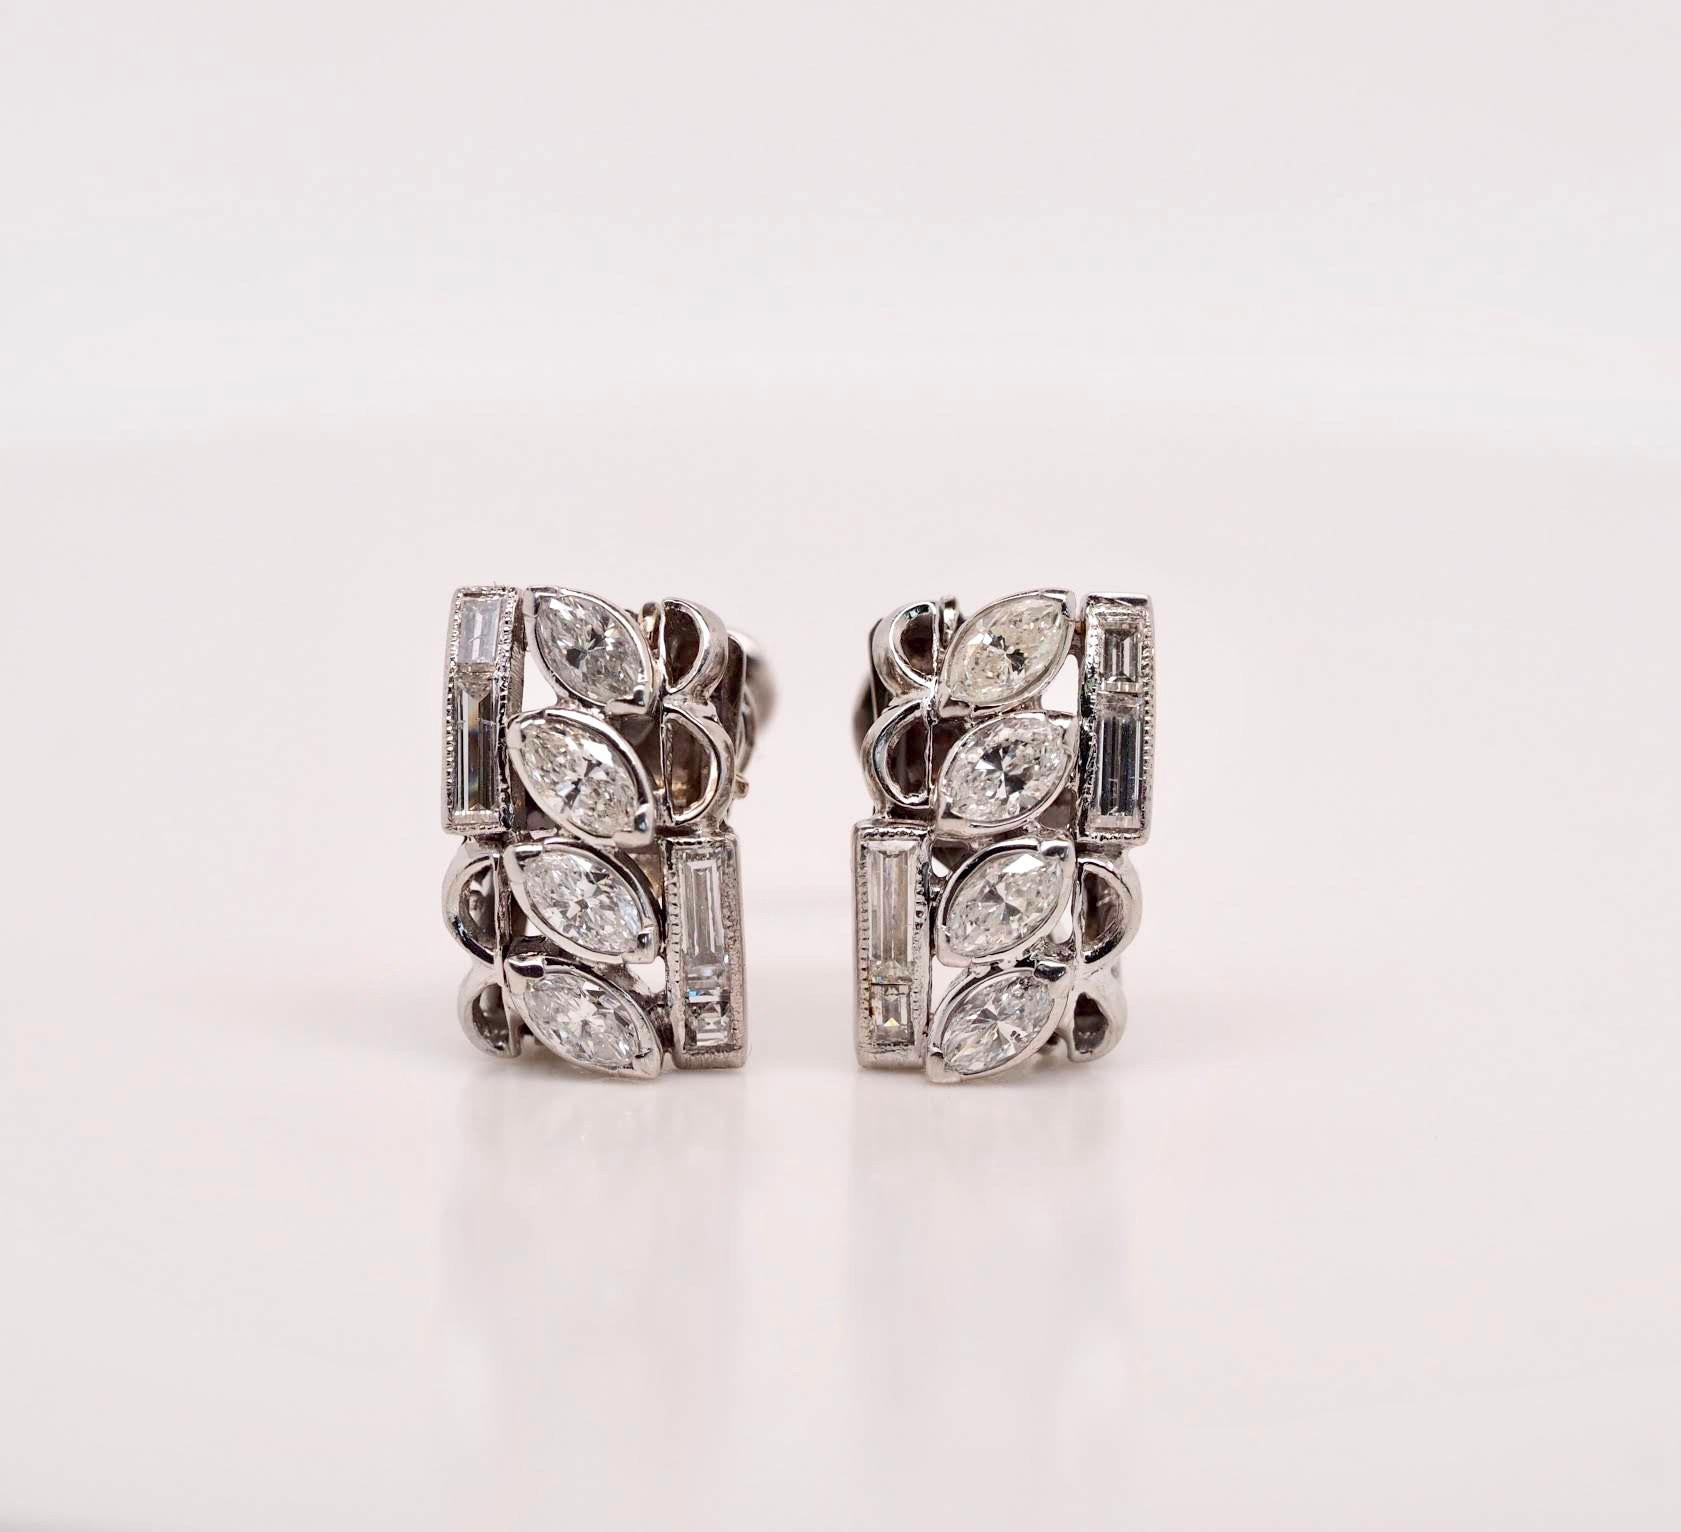 10K White Gold gorgeous vintage diamond earrings include 1.00 carat of 8- Marquise diamonds and 0.40 carats of 4-baguette diamonds. The color is F to G and SI clarity. The earrings are screw backs non pierced. 